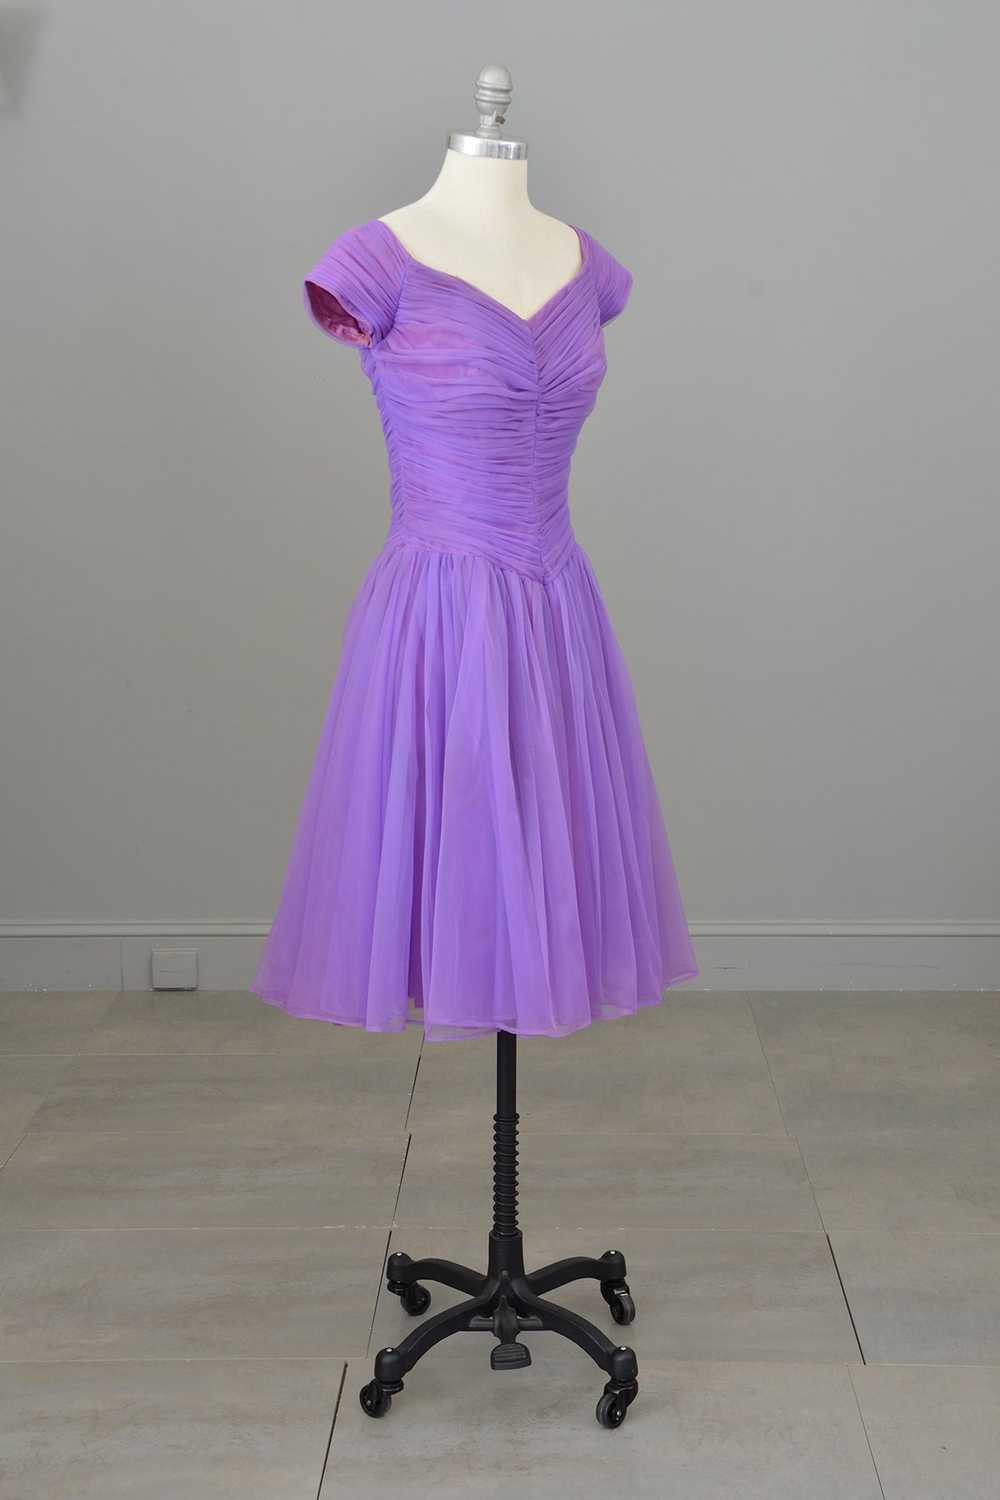 1960s 70s Vibrant Purple Ruched Party Dress - image 4